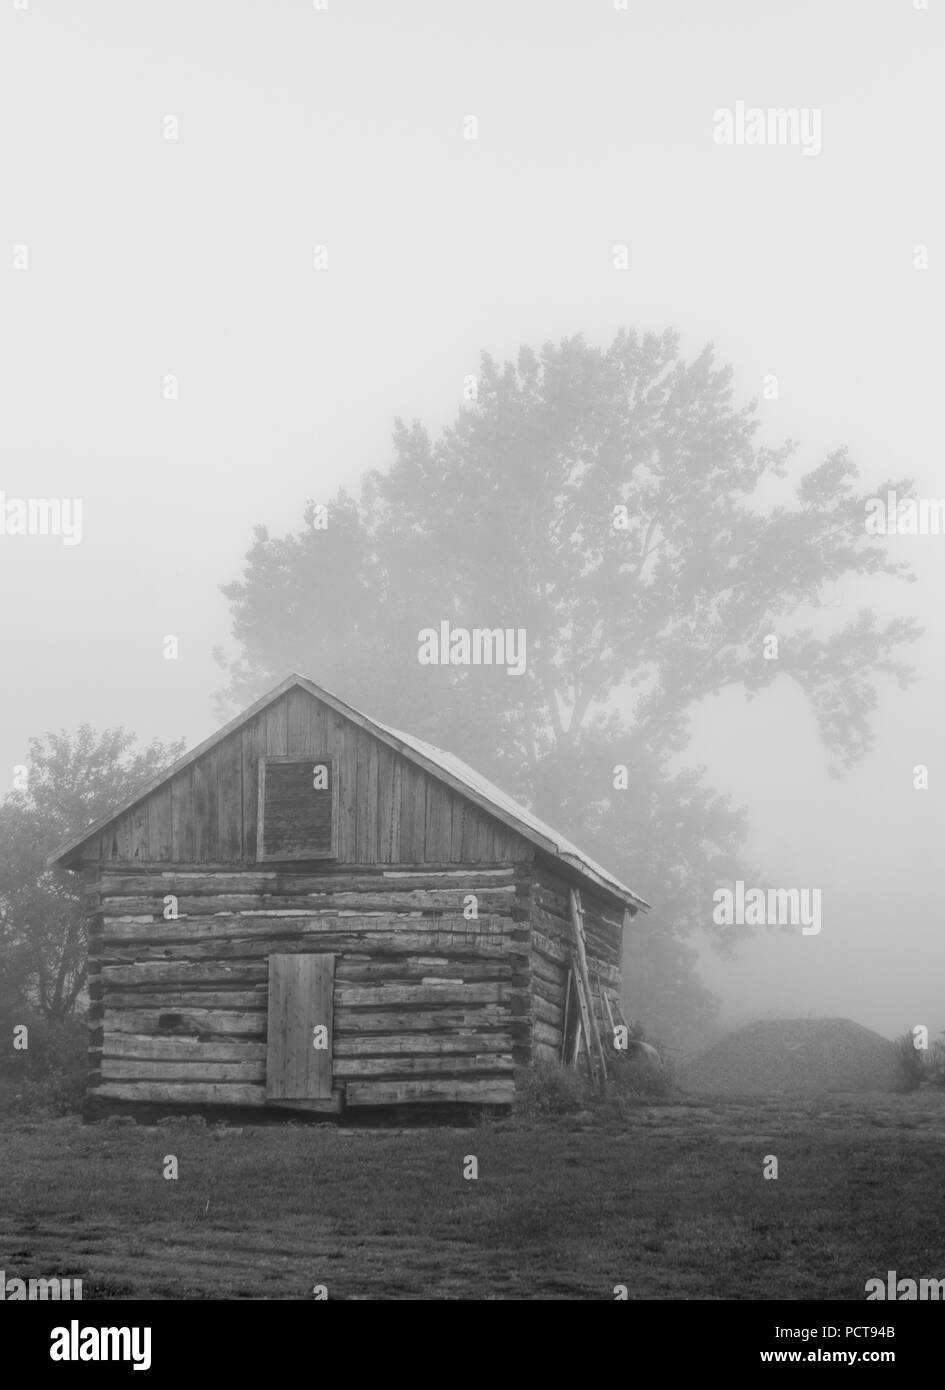 Old vintage sawn log cabin in the fog and trees and raspberry canes black and white Stock Photo